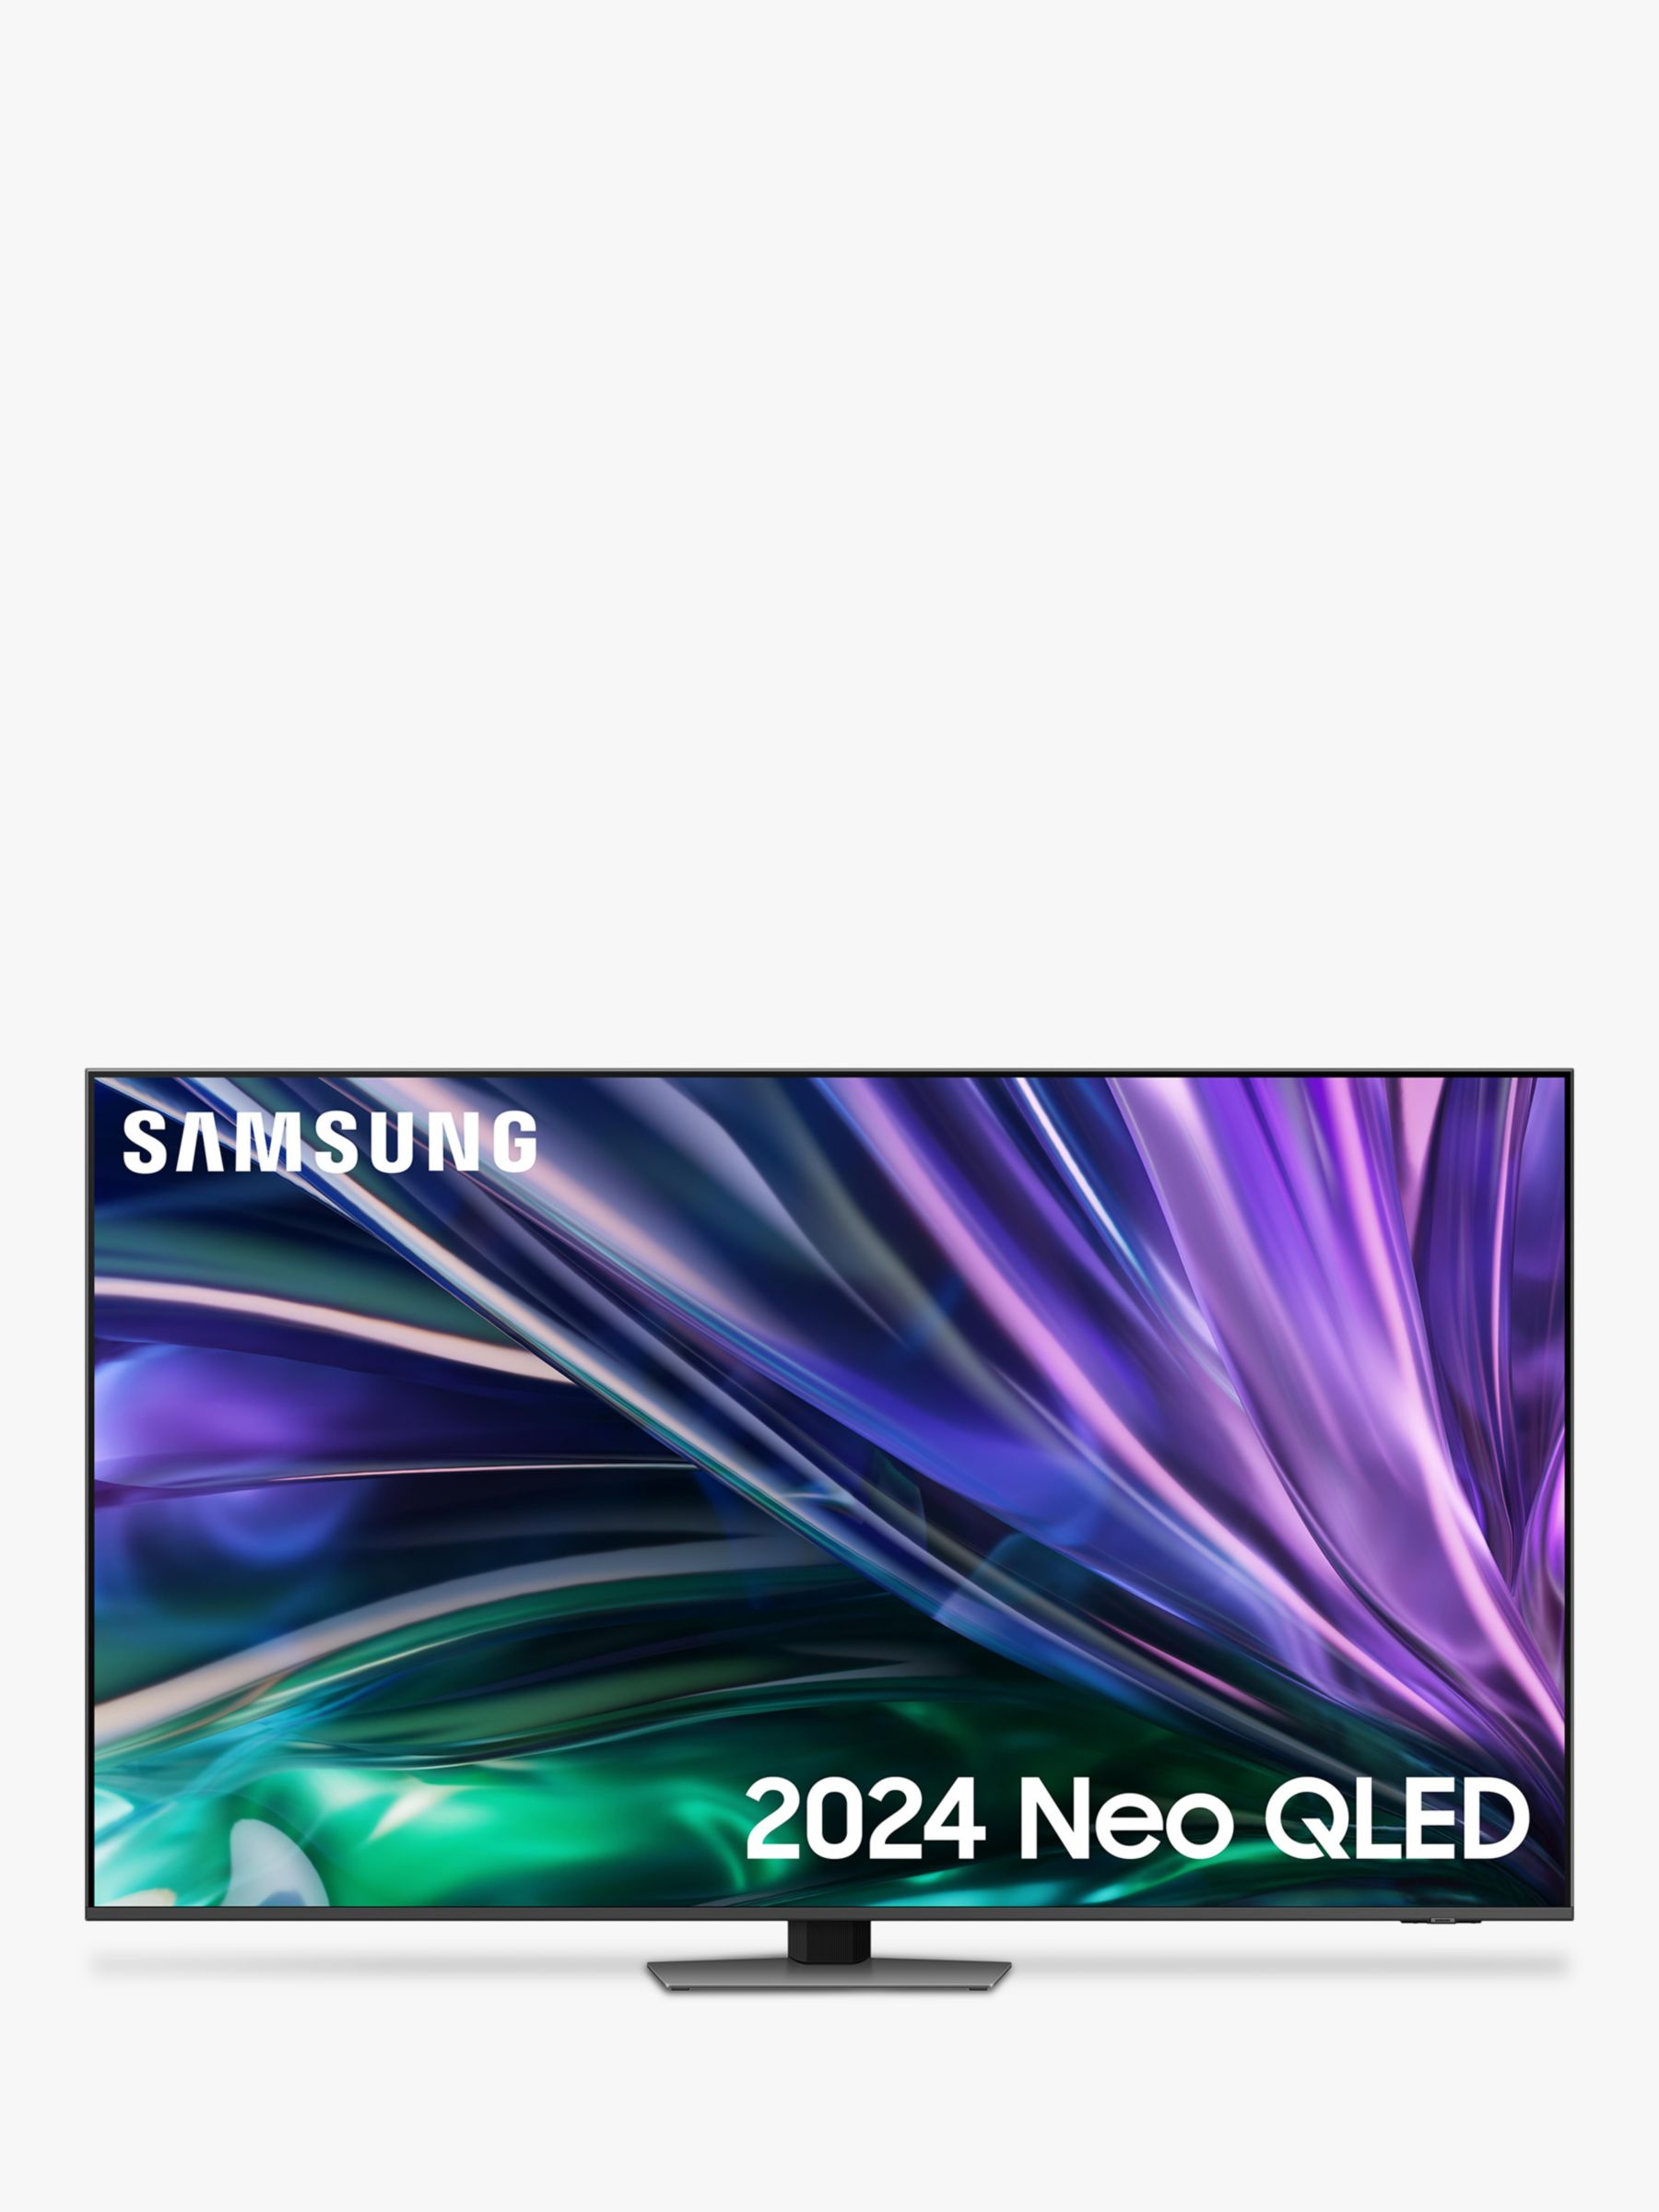 Samsung QE65QN85D (2024) Neo QLED HDR 4K Ultra HD Smart TV, 65 inch with TVPlus & Dolby Atmos, Carbon Silver